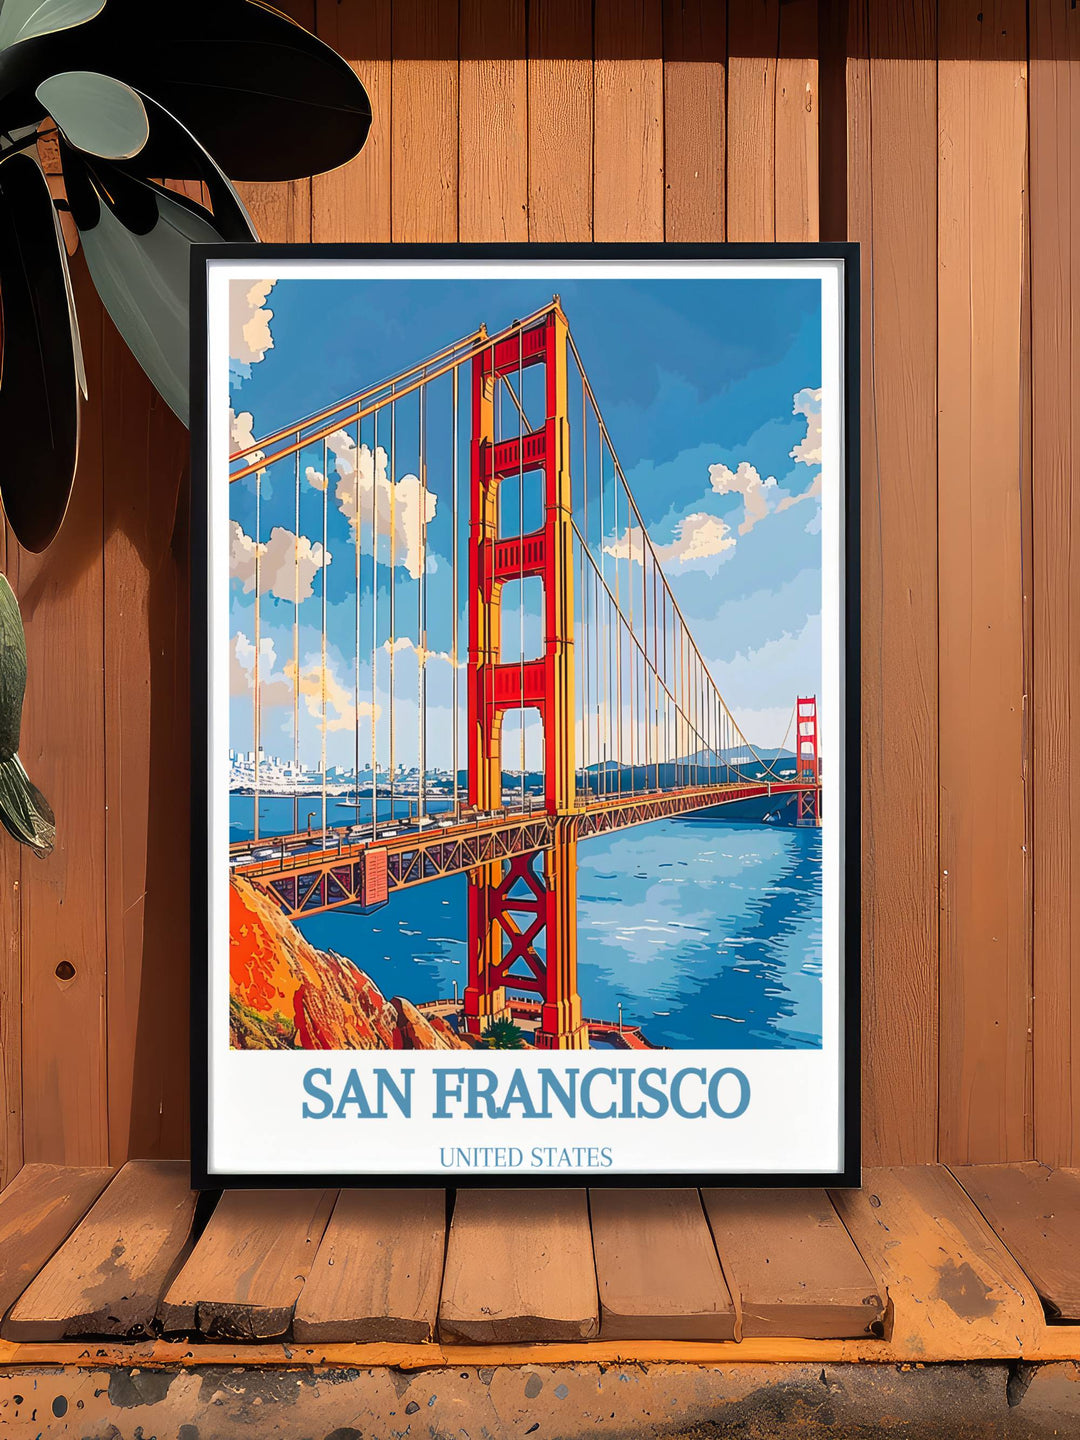 Stunning San Francisco Posters capturing the diverse and vibrant scenes of the city, with a focus on the majestic Golden Gate Bridge.